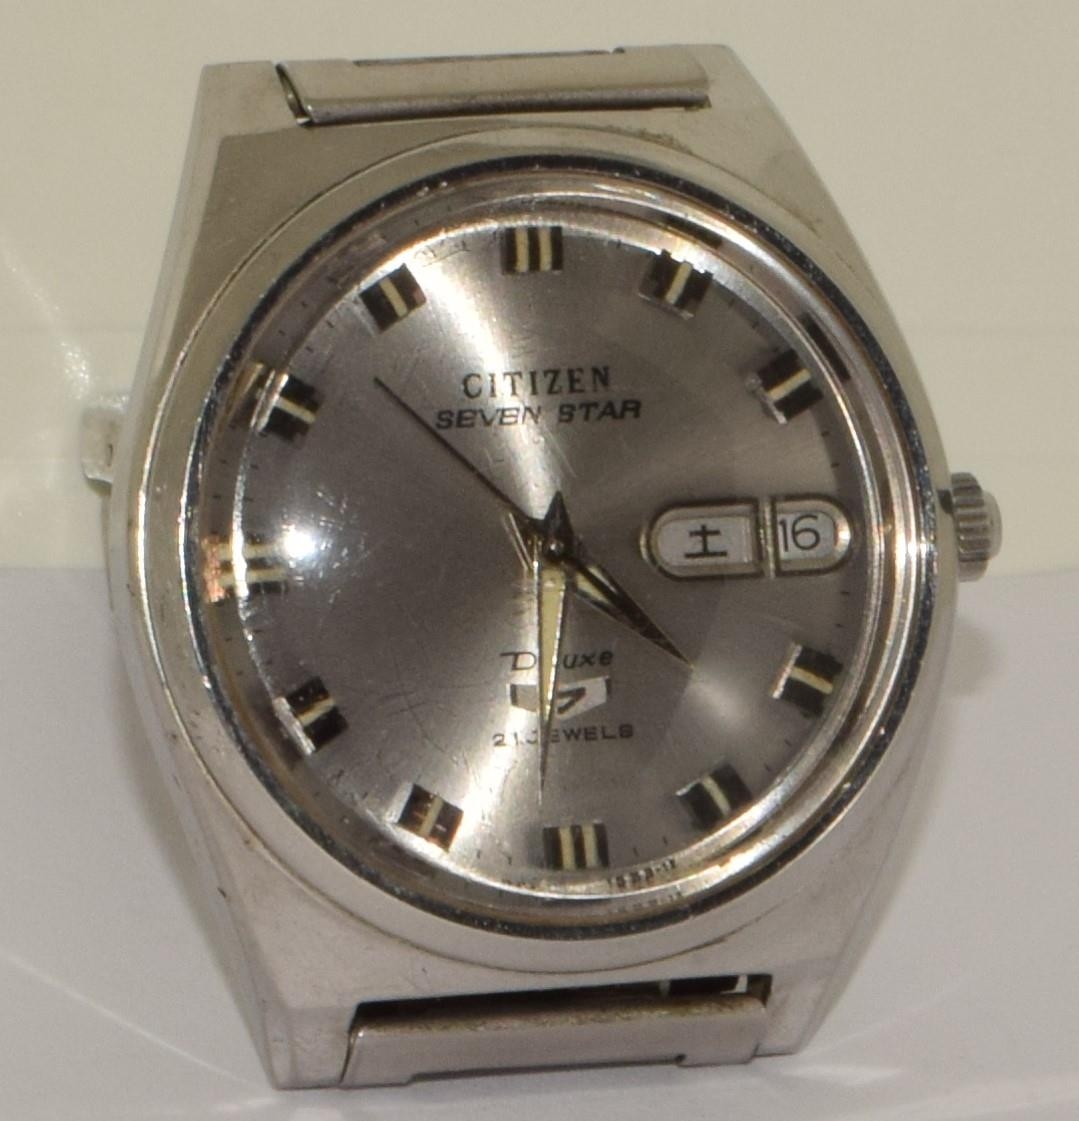 Vintage Citizen 7 star Deluxe 21 jewel automatic watch on stainless steel strap. JDM model with - Image 7 of 7